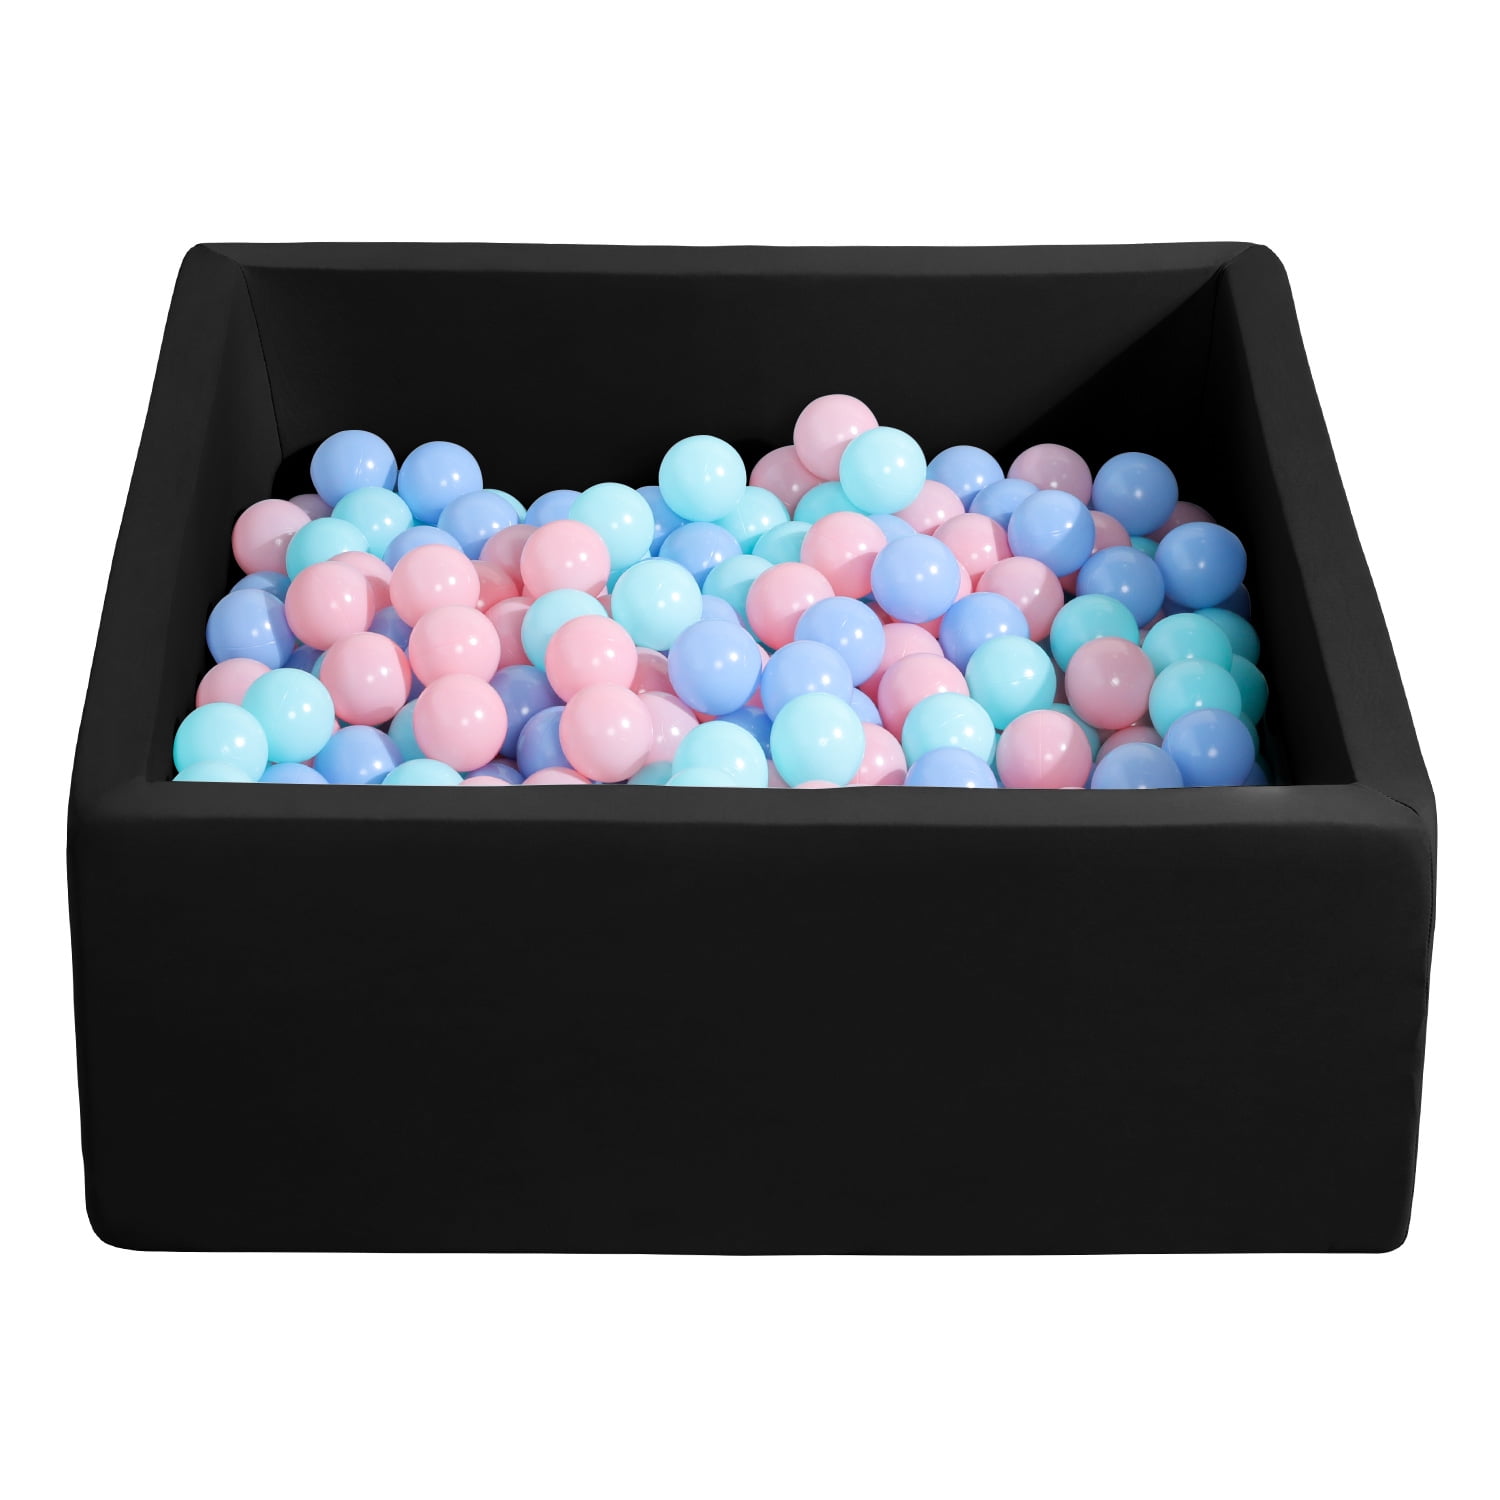 White BPA Free Ocean Ball for Toddlers TRENDBOX 50 pcs Ball Pit Balls Plastic Balls for Ball Pit Black 